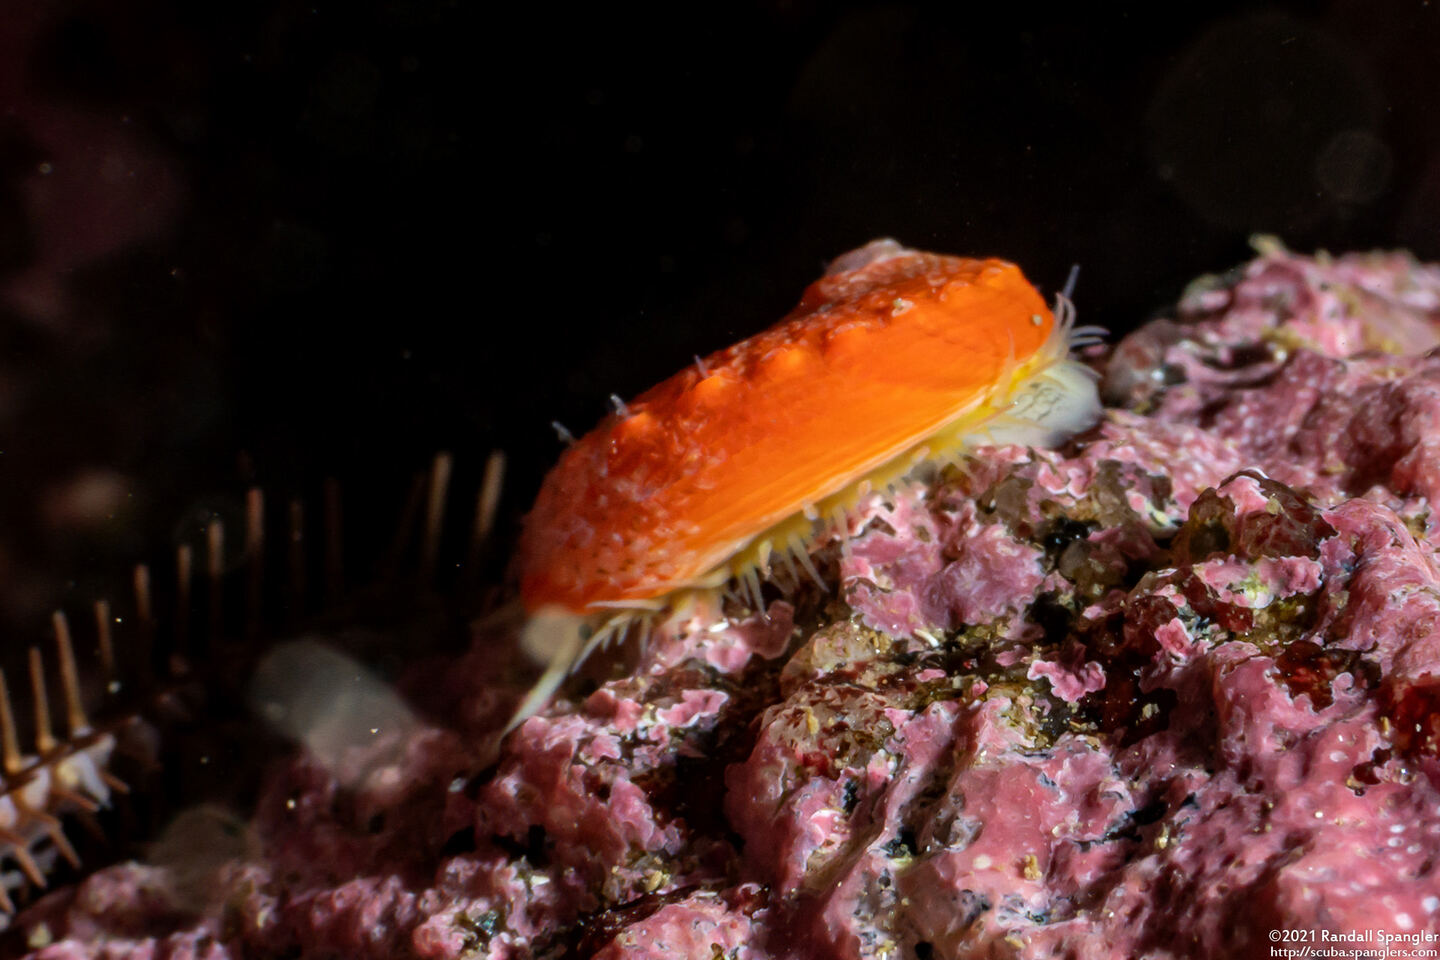 Haliotis rufescens (Red Abalone); Juvenile, about the size of a dime